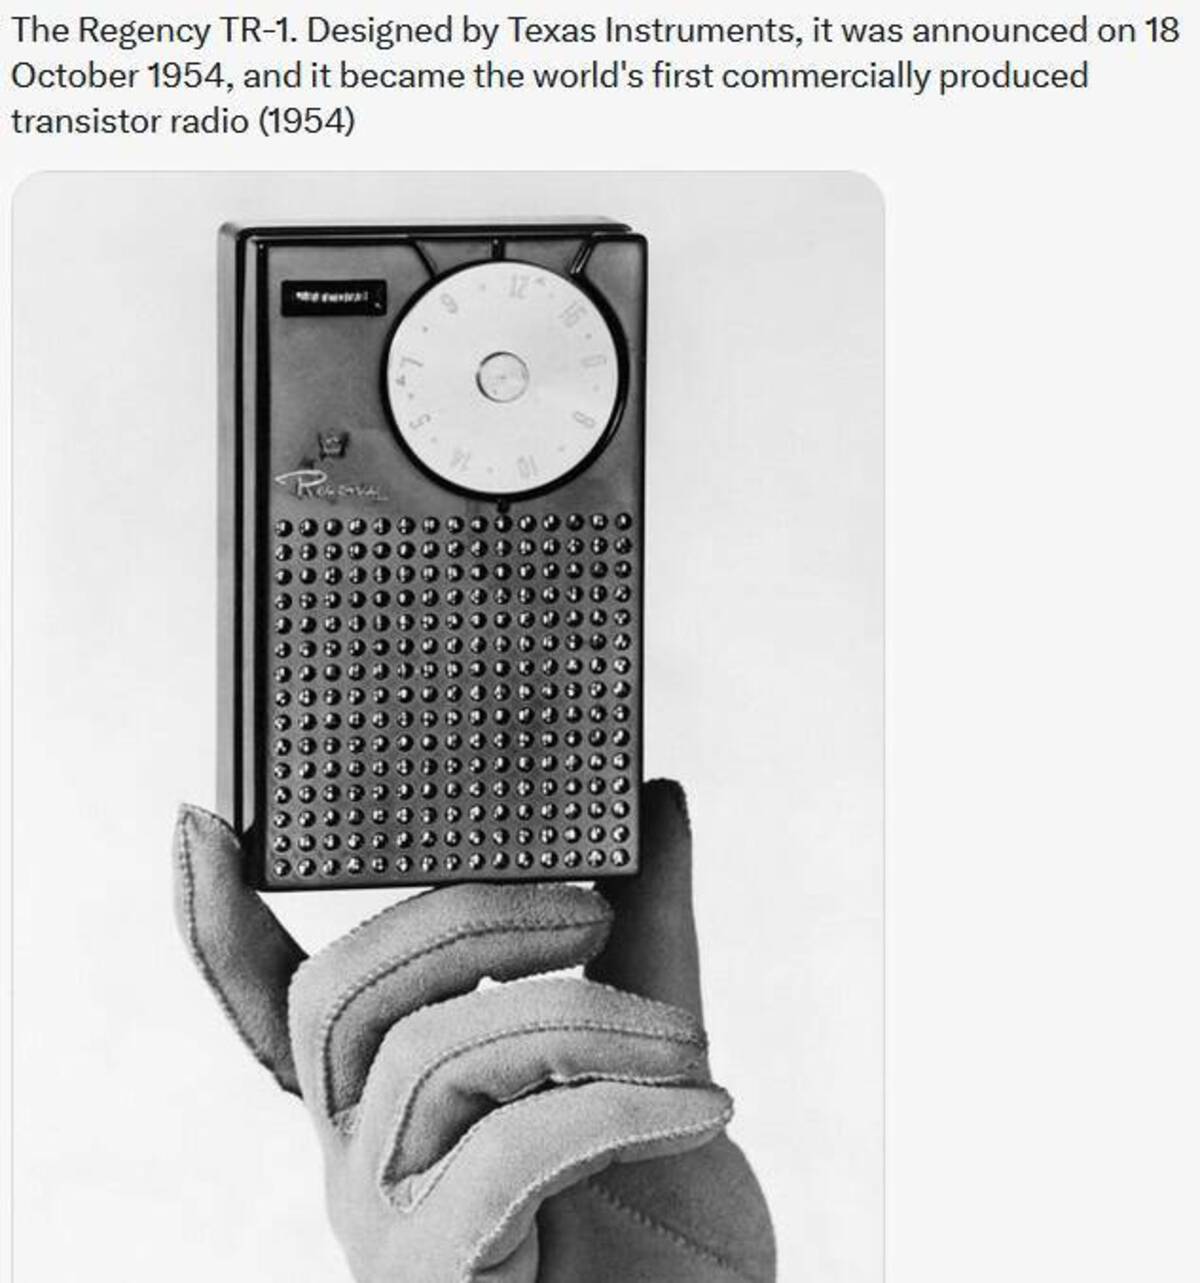 monochrome photography - The Regency Tr1. Designed by Texas Instruments, it was announced on , and it became the world's first commercially produced transistor radio 1954